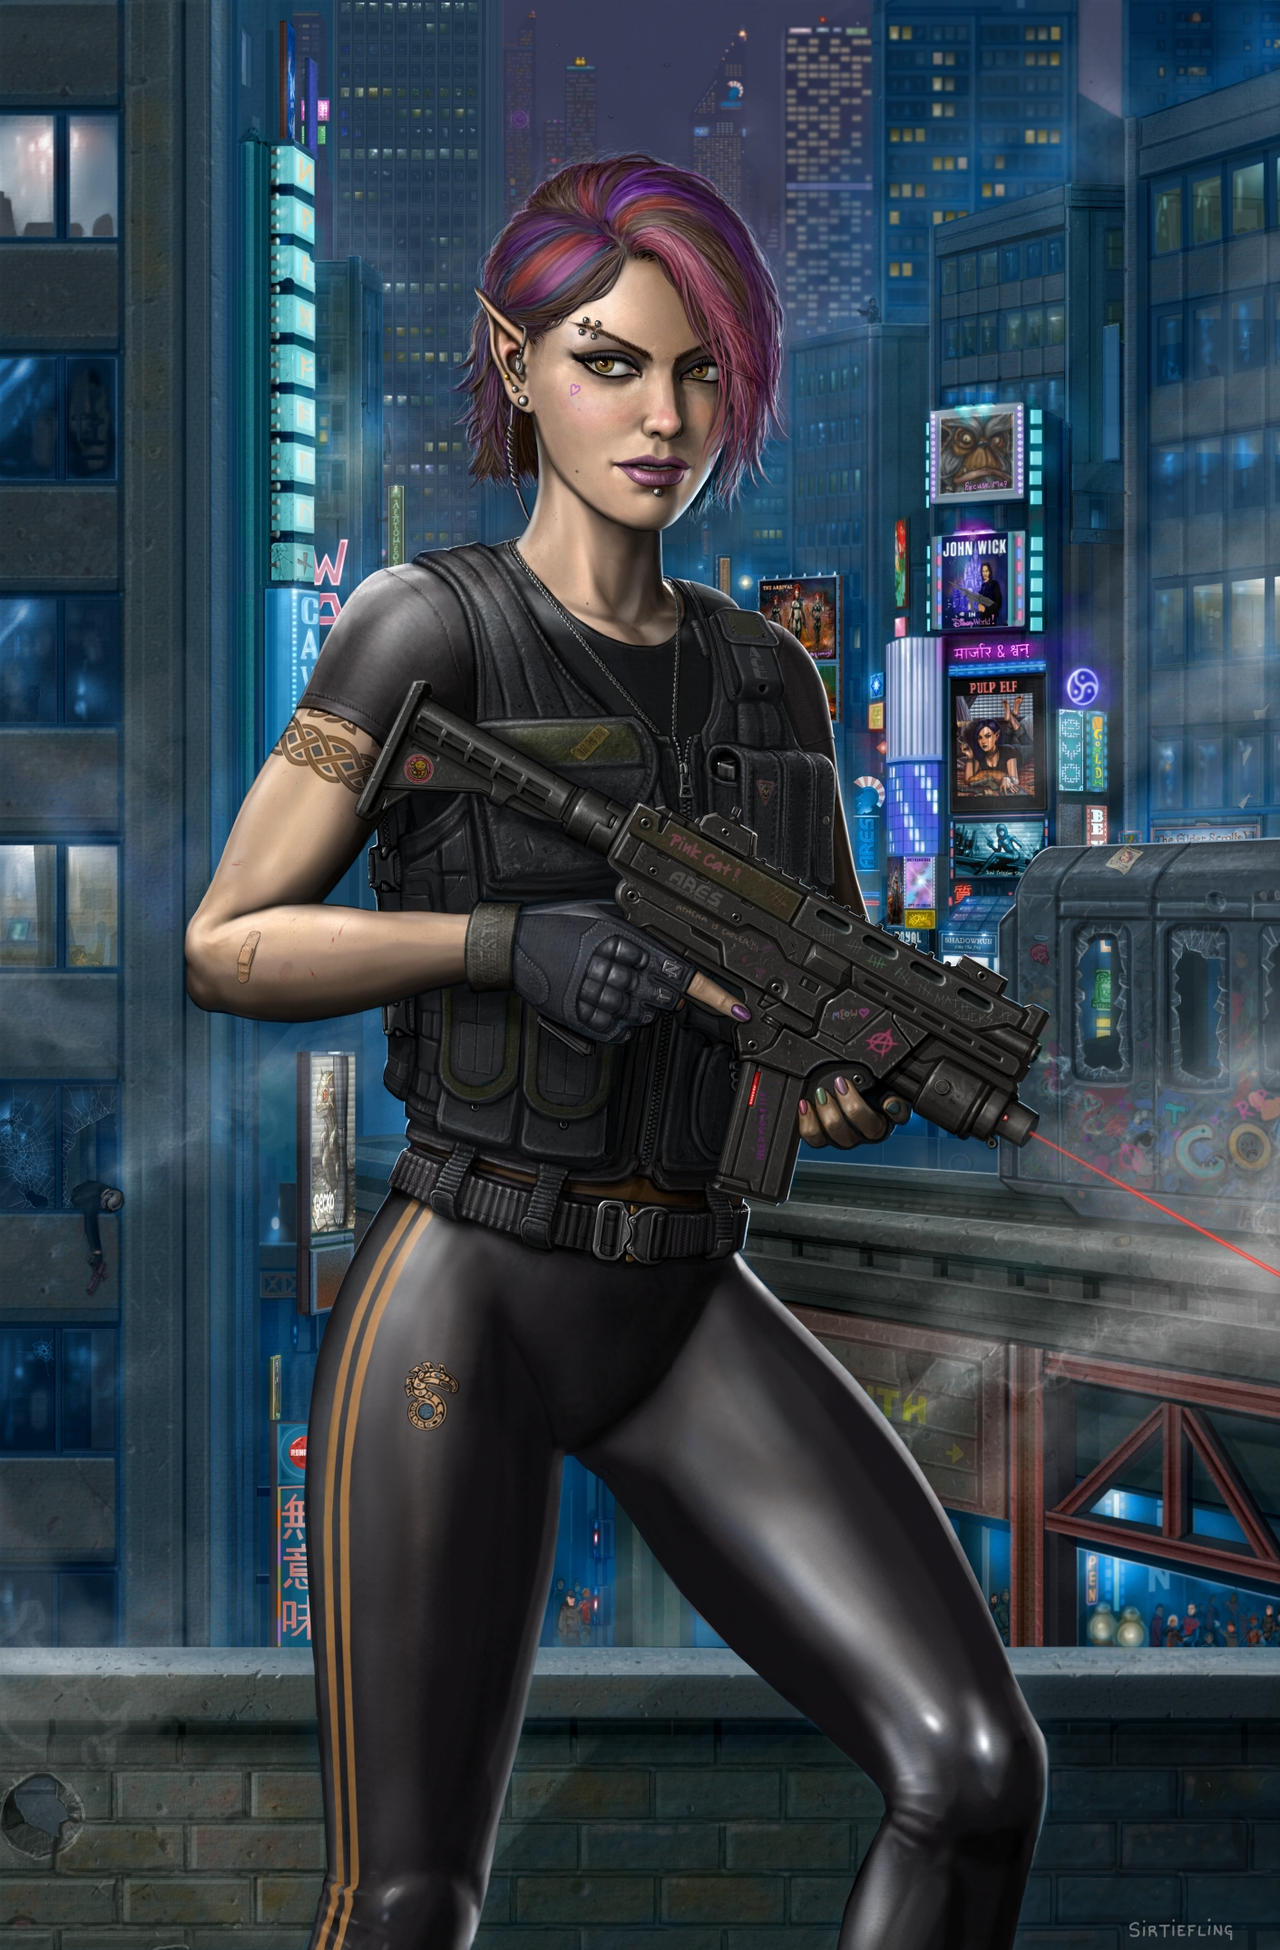 Shadowrunning With Details by SirTiefling on DeviantArt